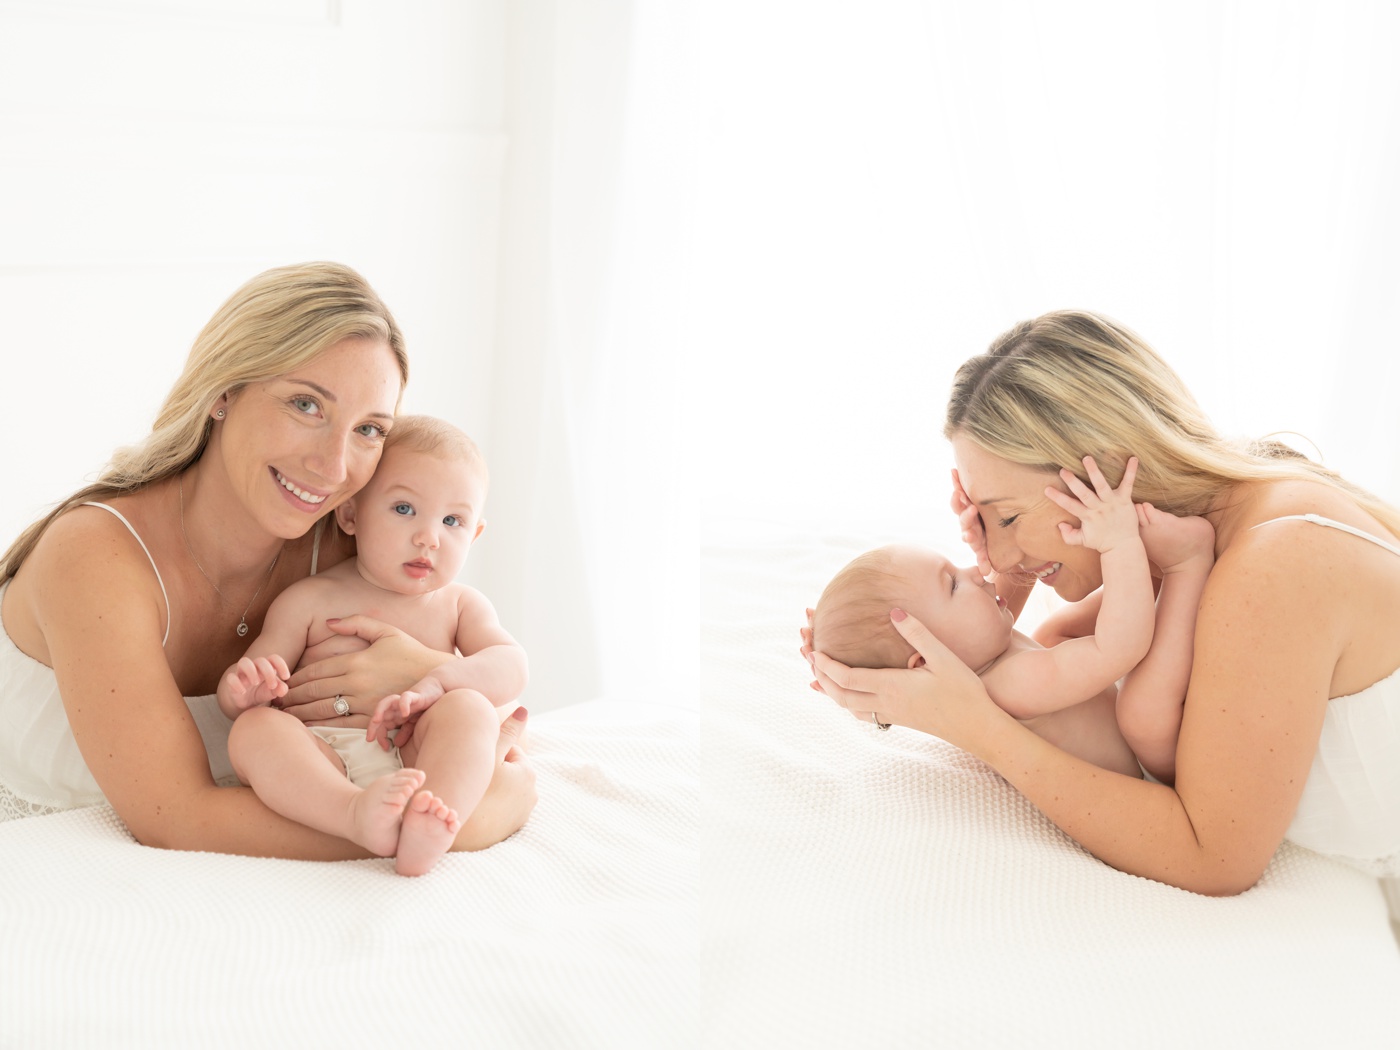 Mommy and baby being photographed in a photography studio wearing matching white dress and diaper cover